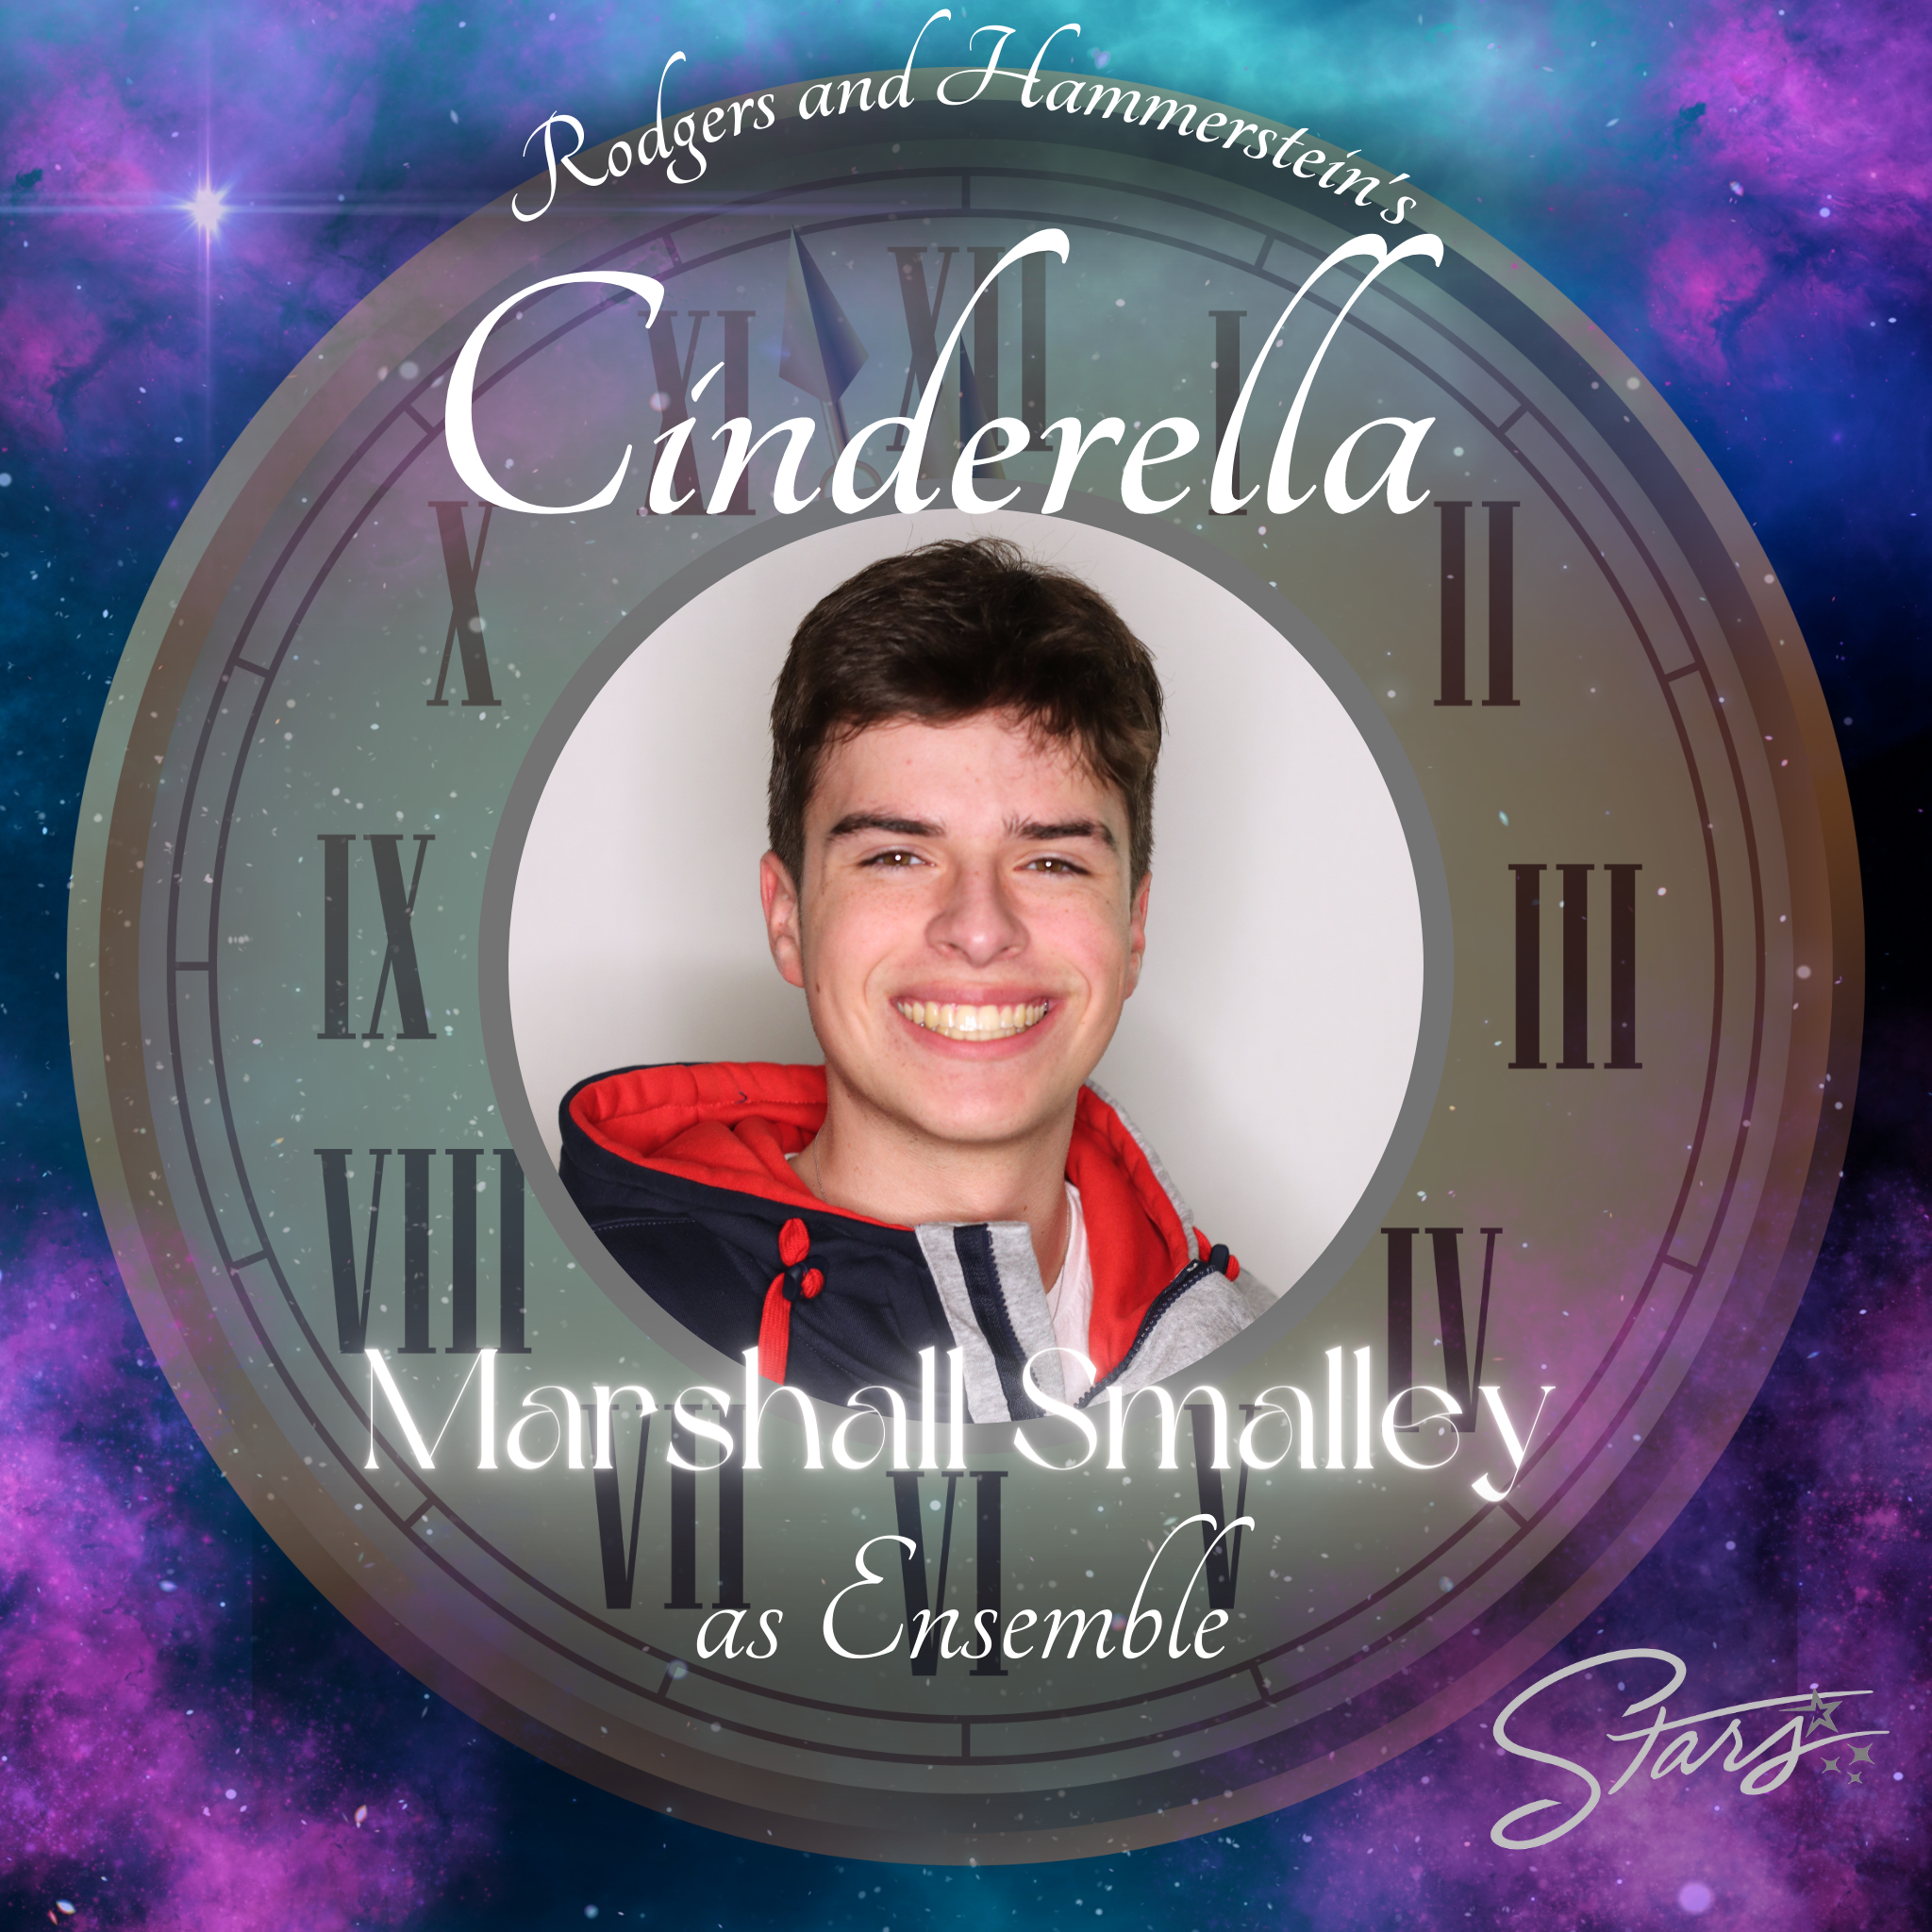 Marshall Smalley as Ensemble in Cinderella